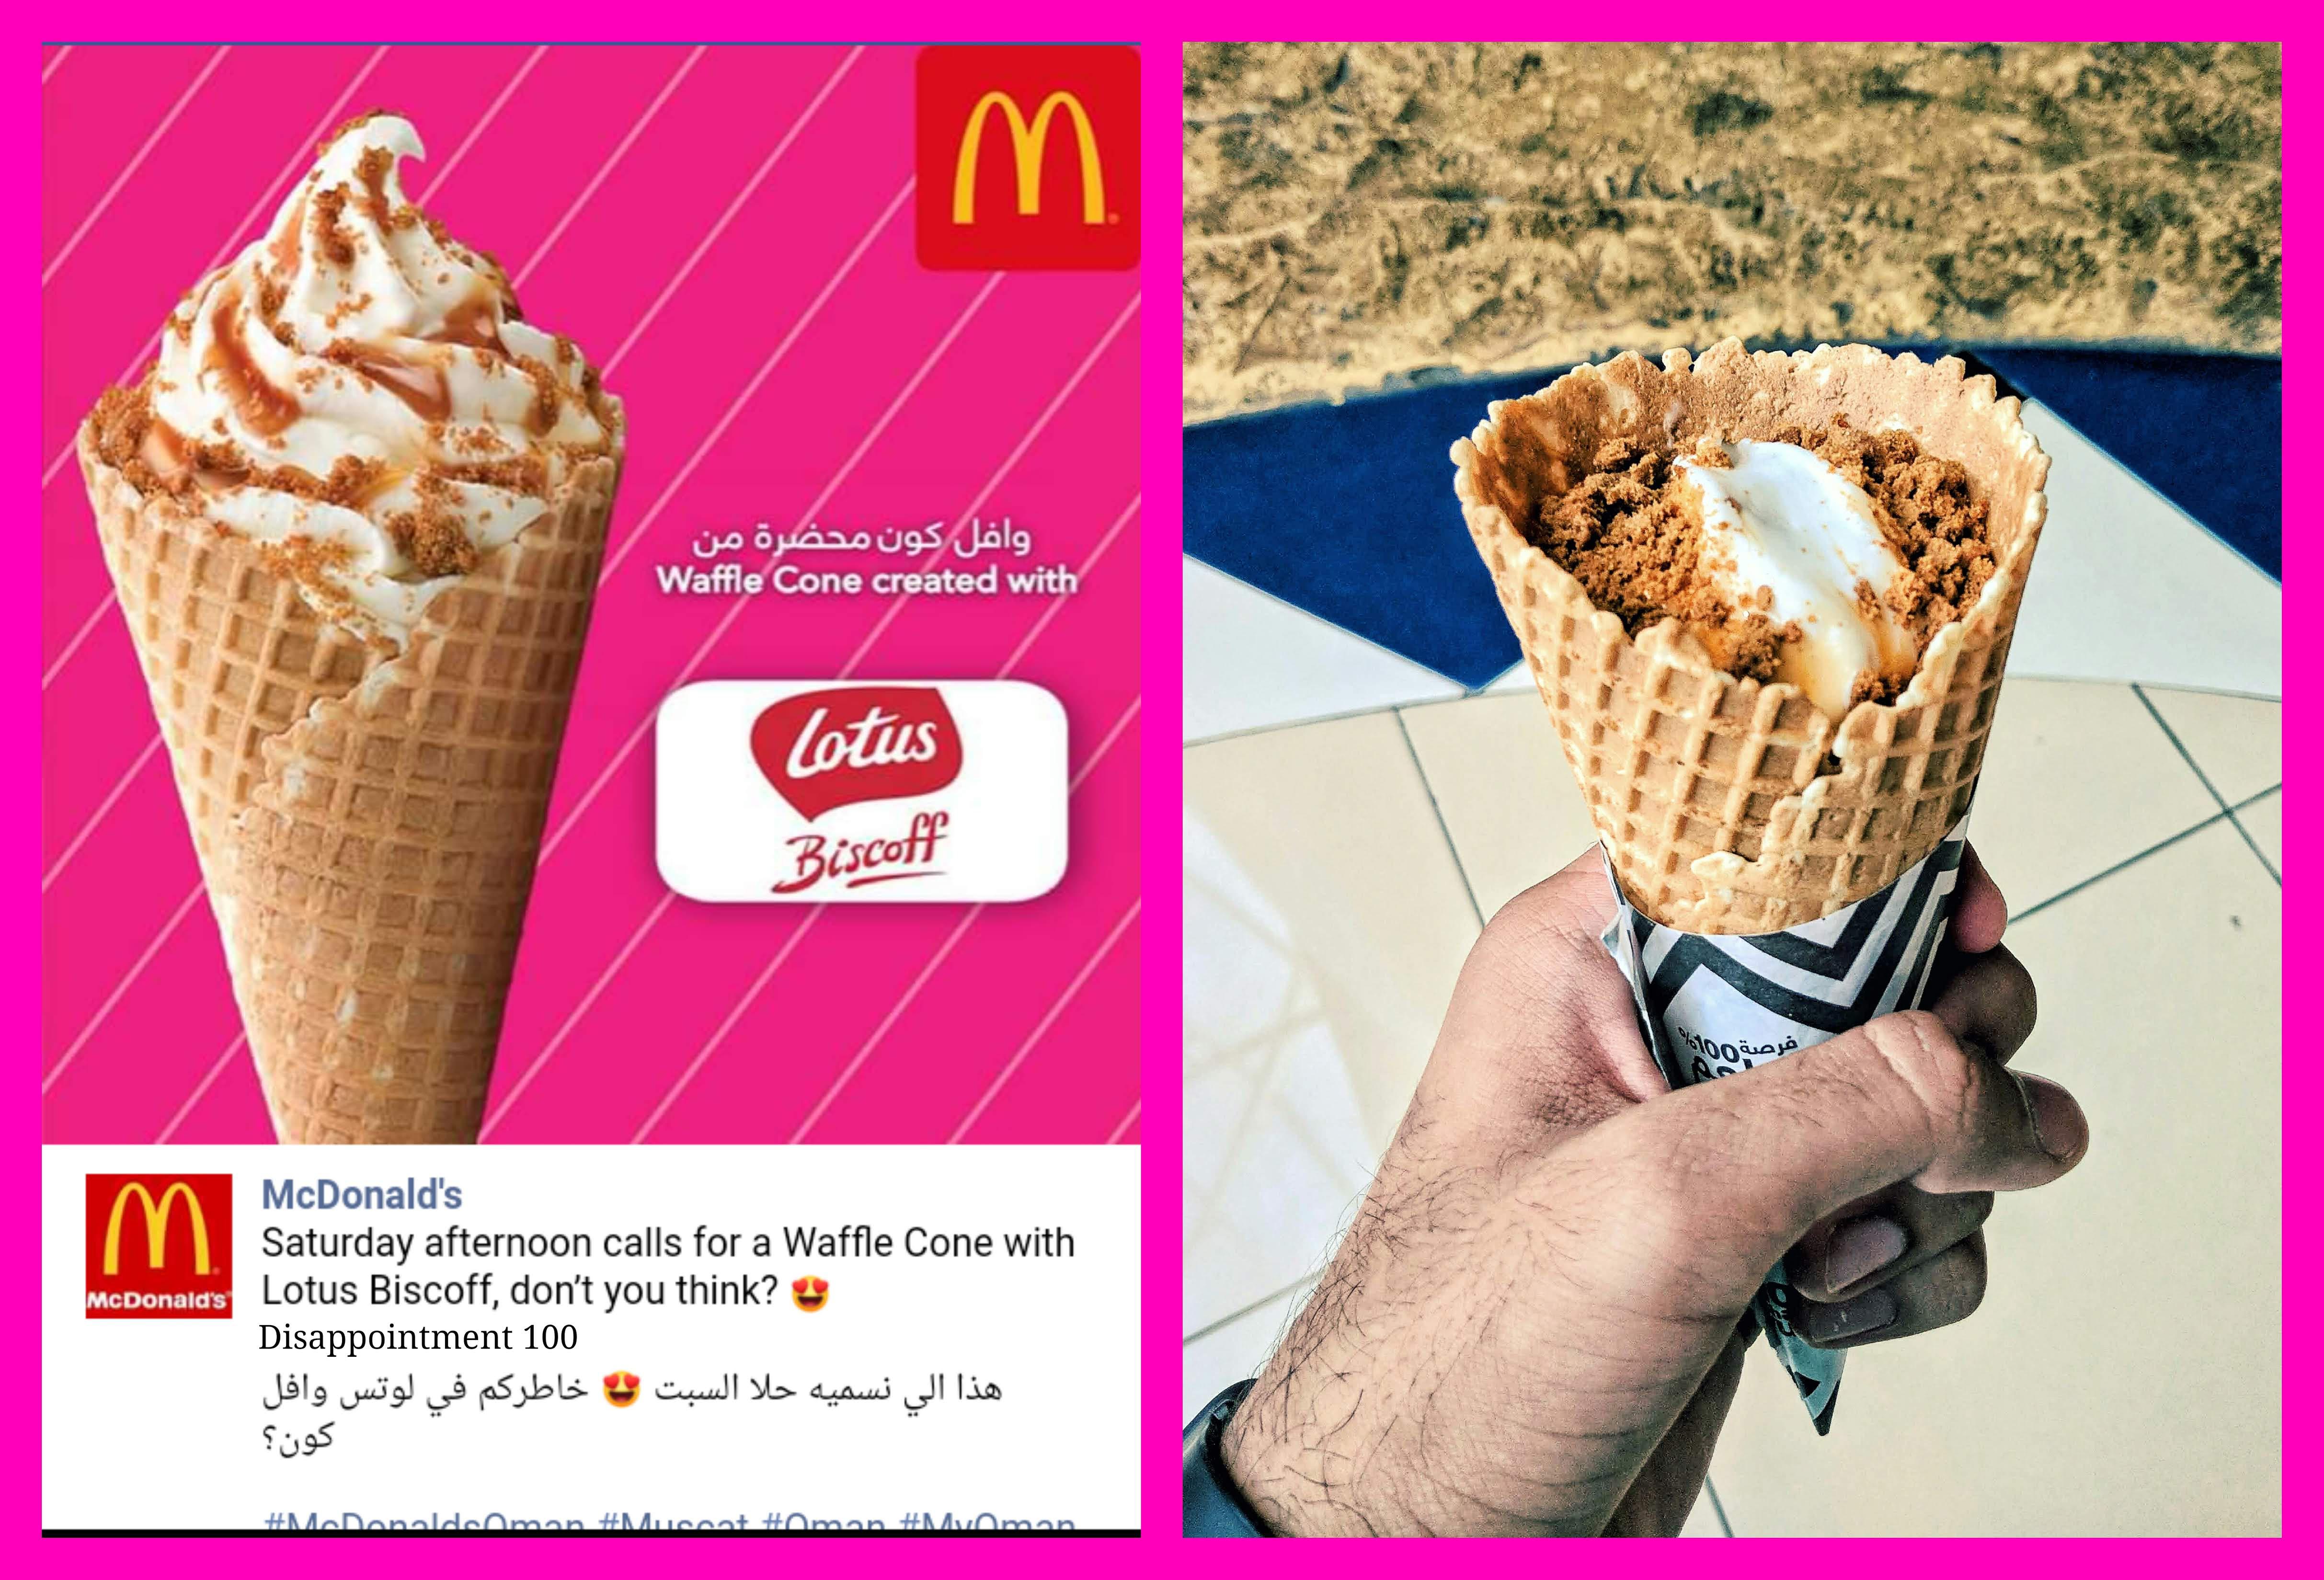 mc donald lotus ice cream - Waffle Cone created with Lotus Biscoff mi McDonald's Saturday afternoon calls for a Waffle Cone with Lotus Biscoff, don't you think? Disappointment 100